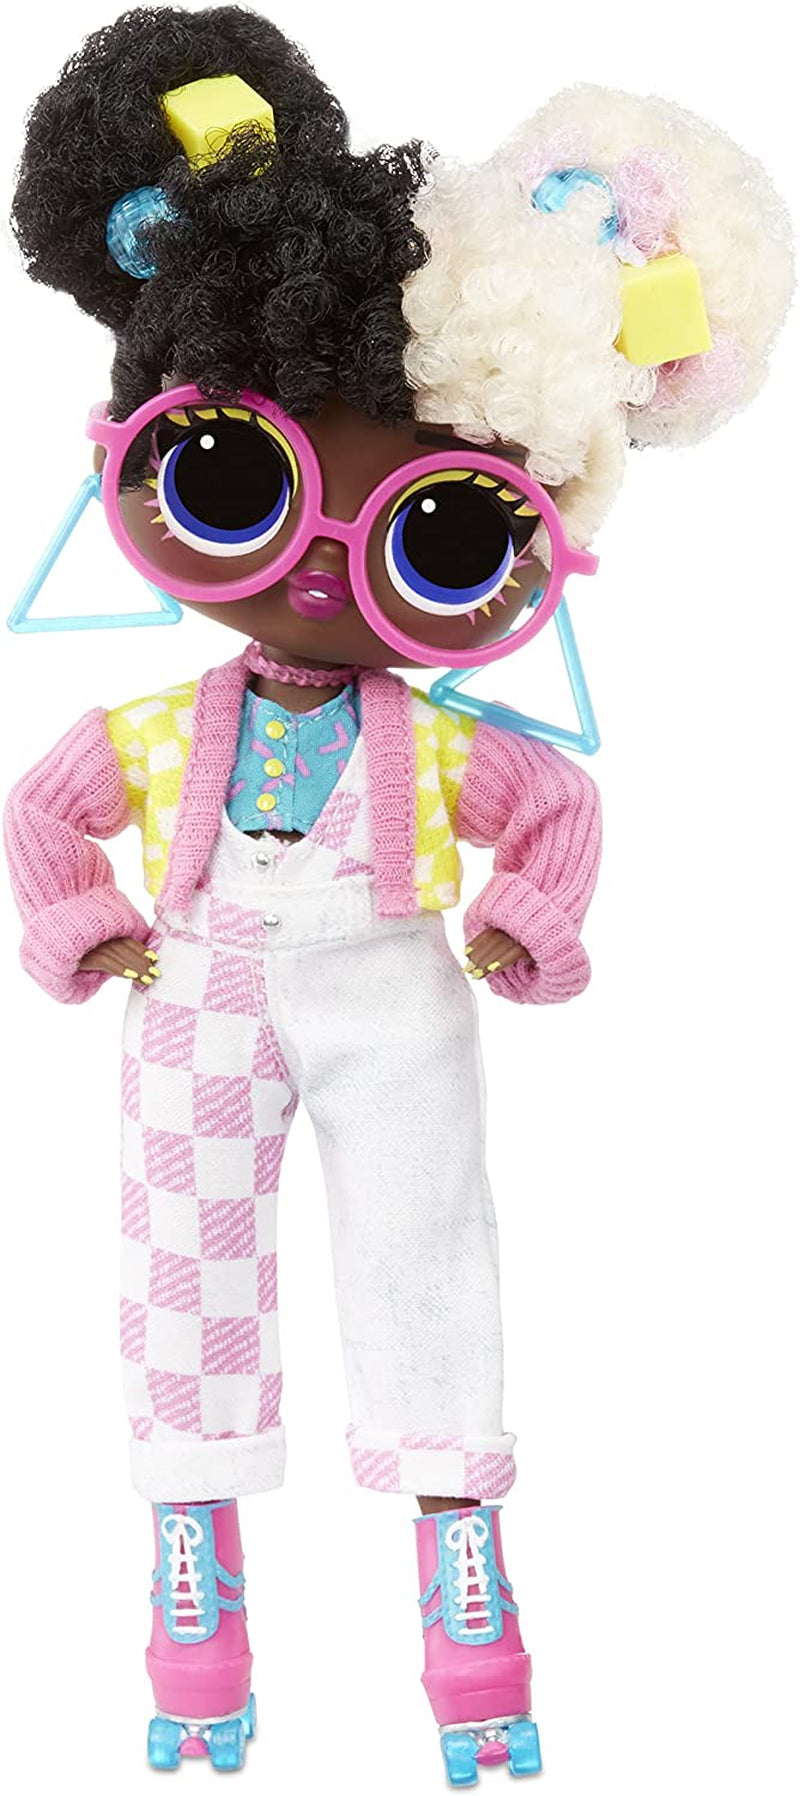 LOL Surprise Tweens Series 2 Fashion Doll Gracie Skates with 15 Surprises Including Pink Outfit and Accessories for Fashion Toy Girls Ages 3 and Up, 6 Inch Doll Sporting Goods > Outdoor Recreation > Winter Sports & Activities L.O.L. Surprise!   